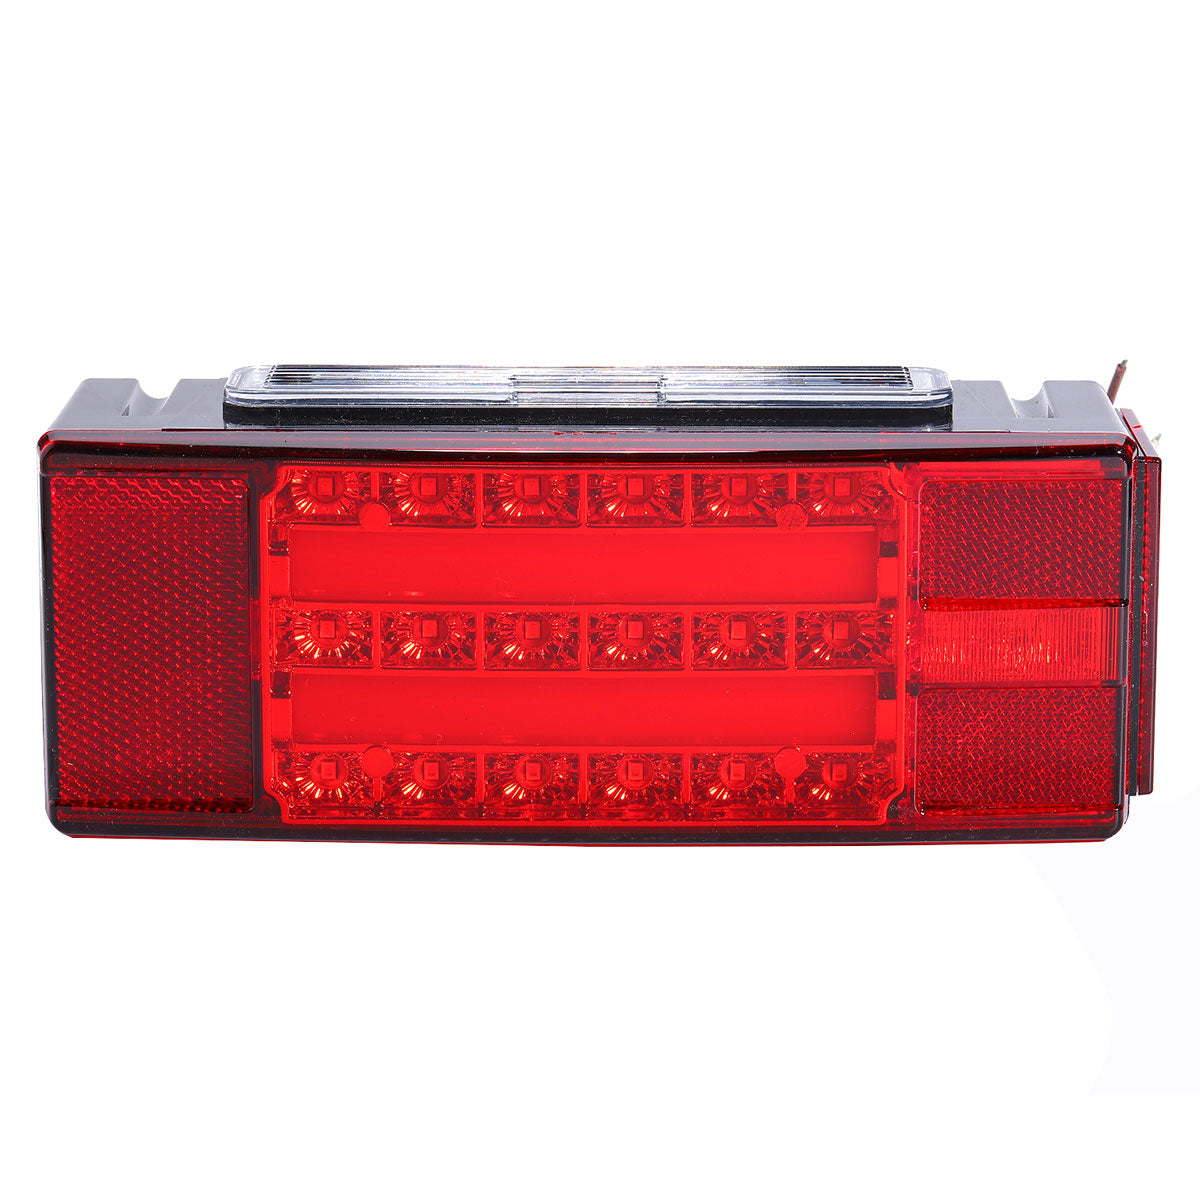 Firebrick Pair LED Rectangle Stud Stop Turn Tail Lights Waterproof Red for Truck Trailer Boat